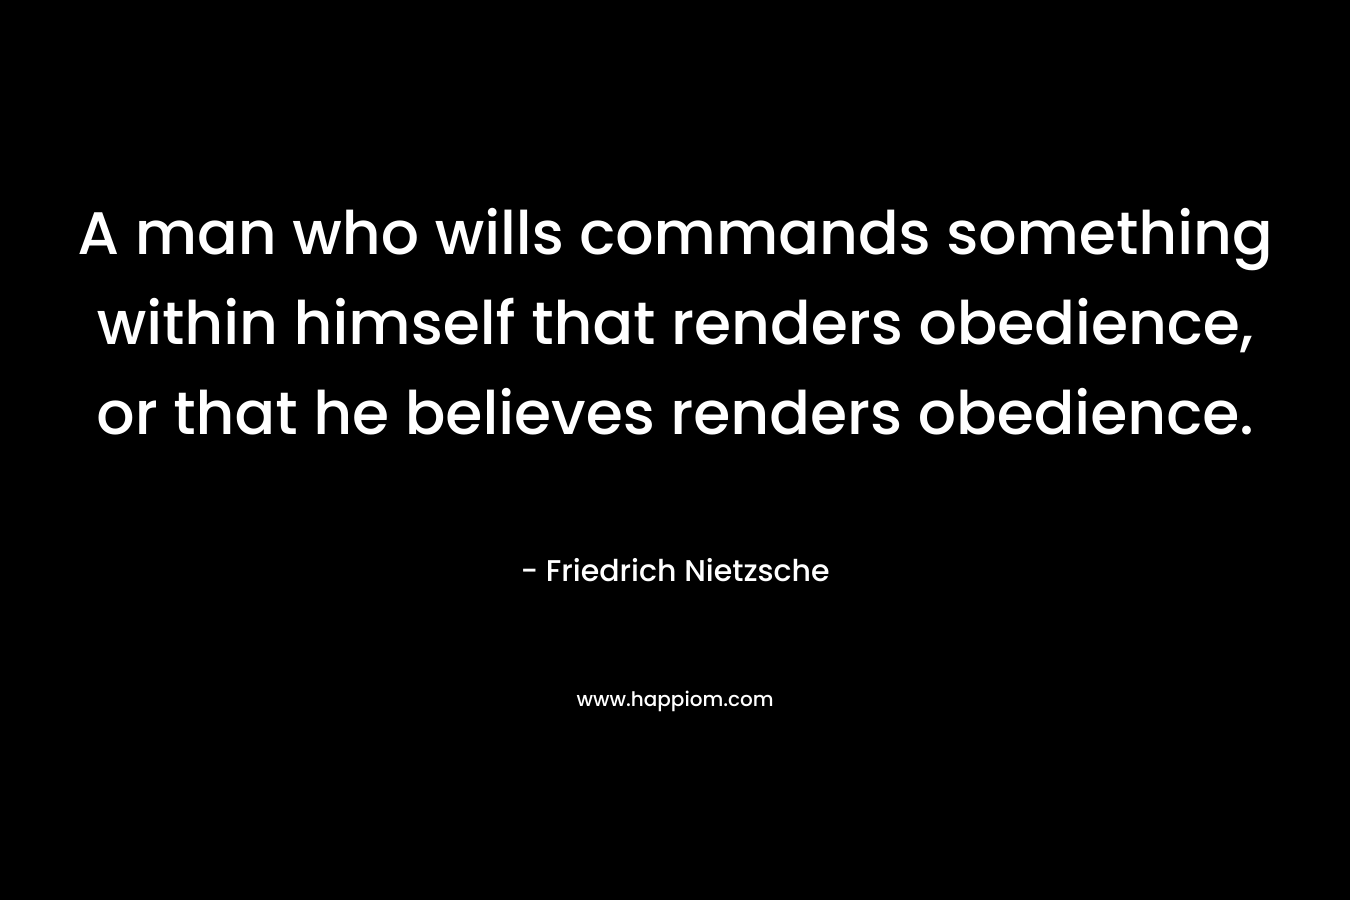 A man who wills commands something within himself that renders obedience, or that he believes renders obedience. – Friedrich Nietzsche